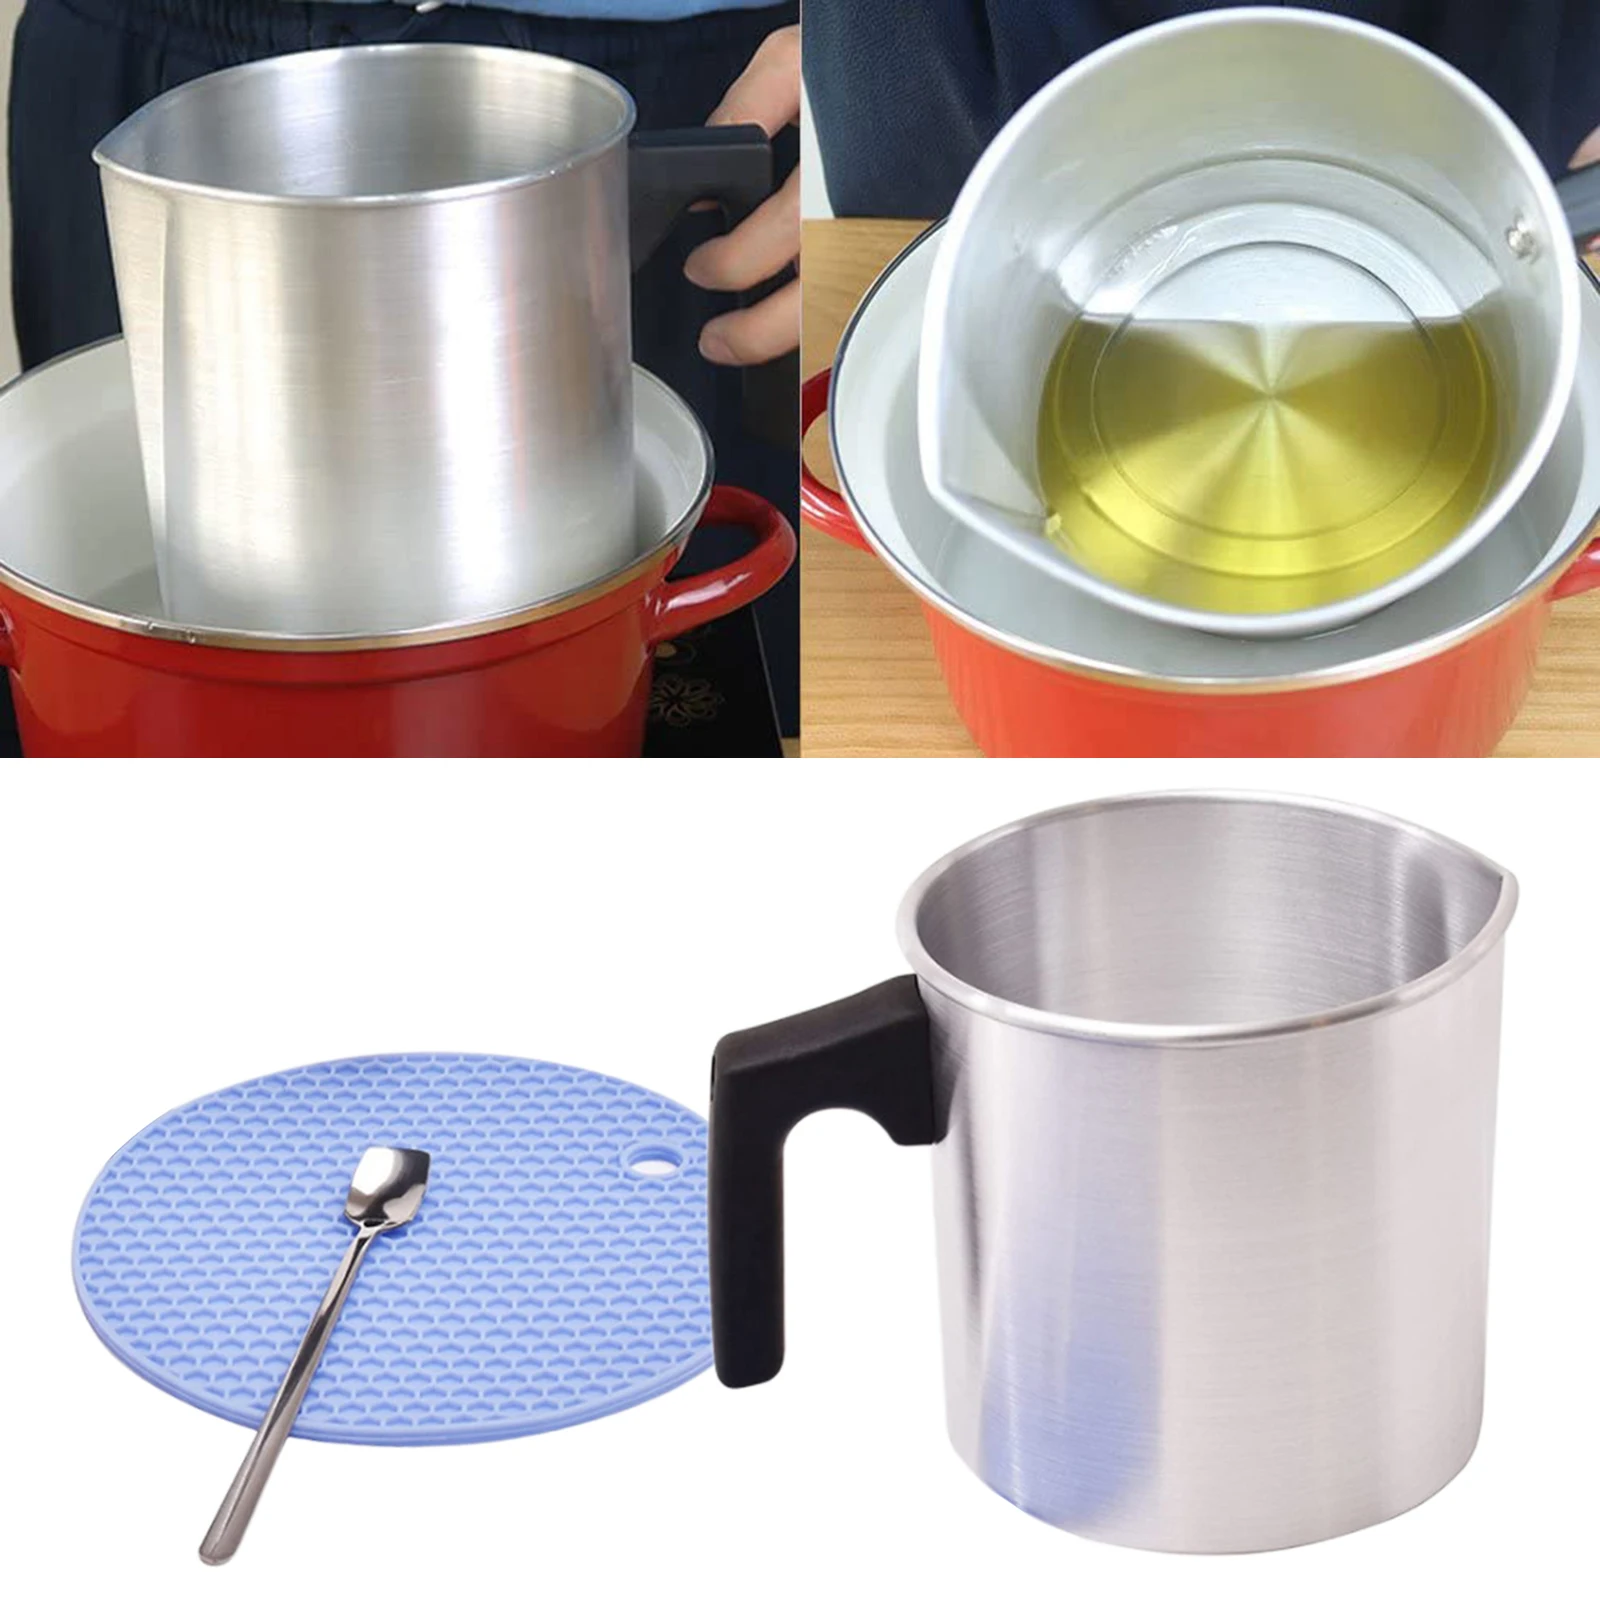 Candle Wax Melting Frothing Jug Double Boiler Pitcher Candle Making Pitcher Wax Melting Pouring Pot for Soap Resin Crafts